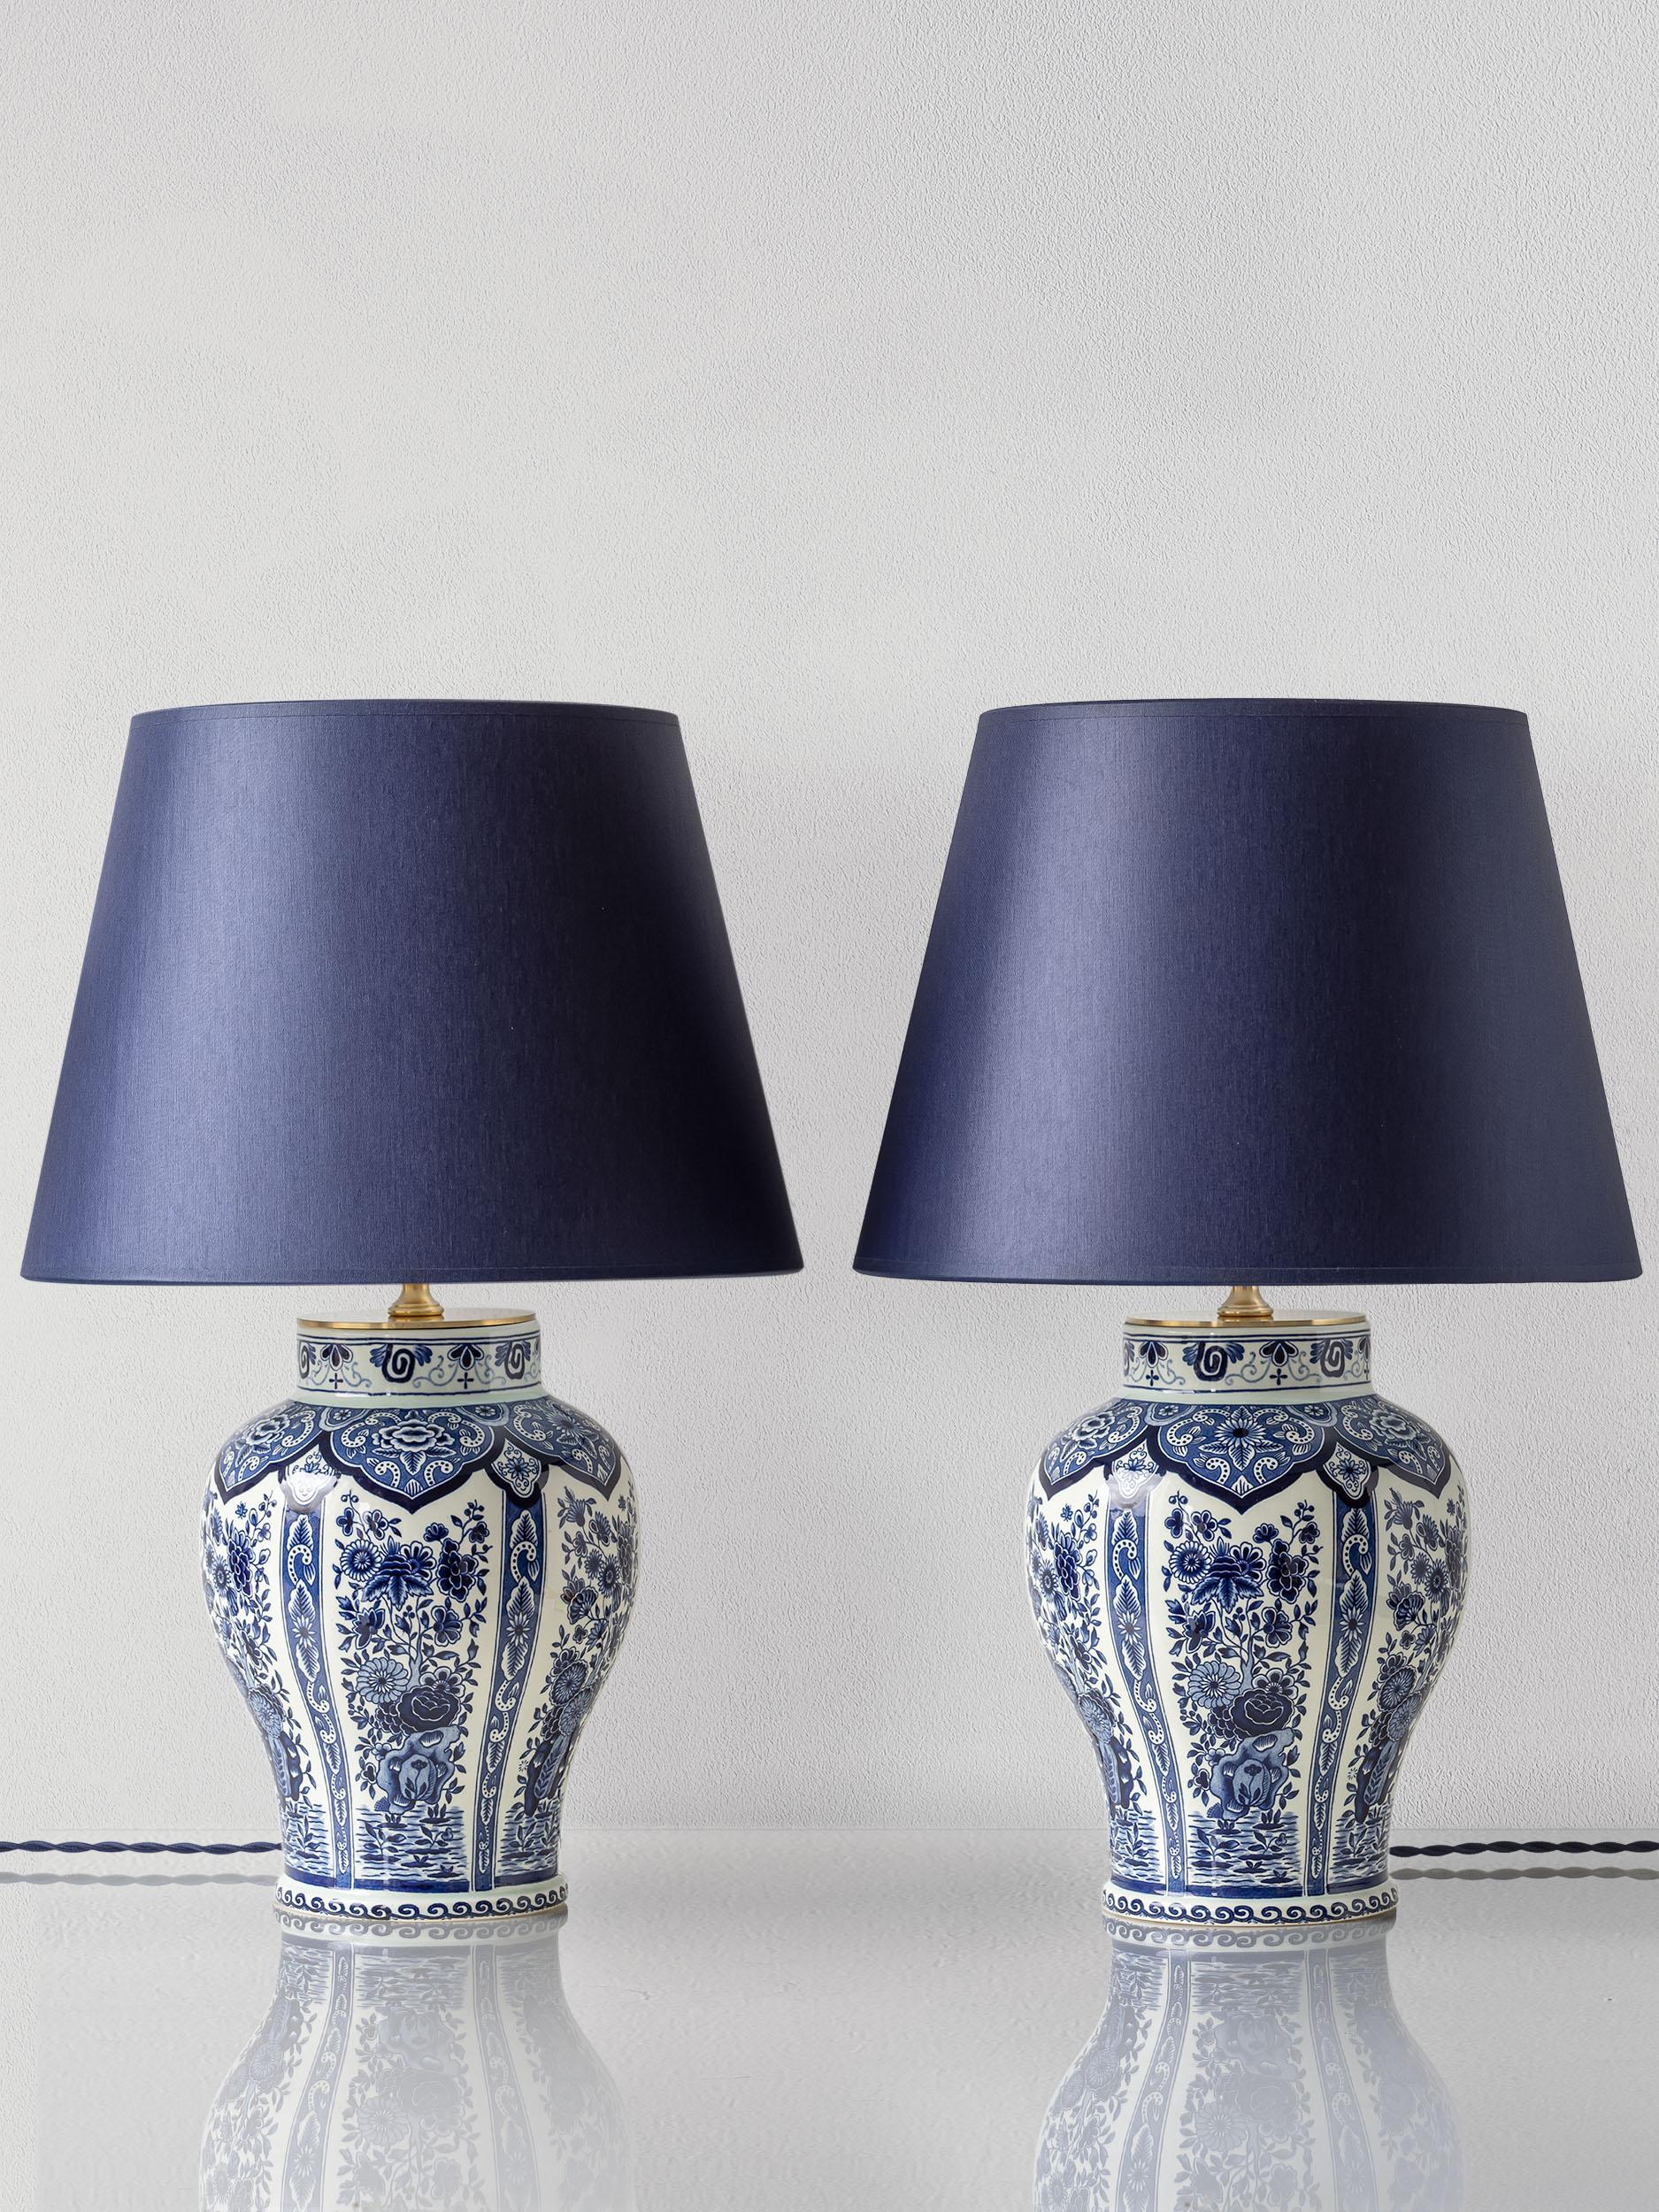 Meet Eugène & Victor! Named after two of the founders of Boch Frères, these one-of-a-kind lamps have been lovingly handcrafted from two vintage vases designed by Boch Frères Keramis in La Louviere, Belgium for Royal Sphinx (formerly Petrus Regout)